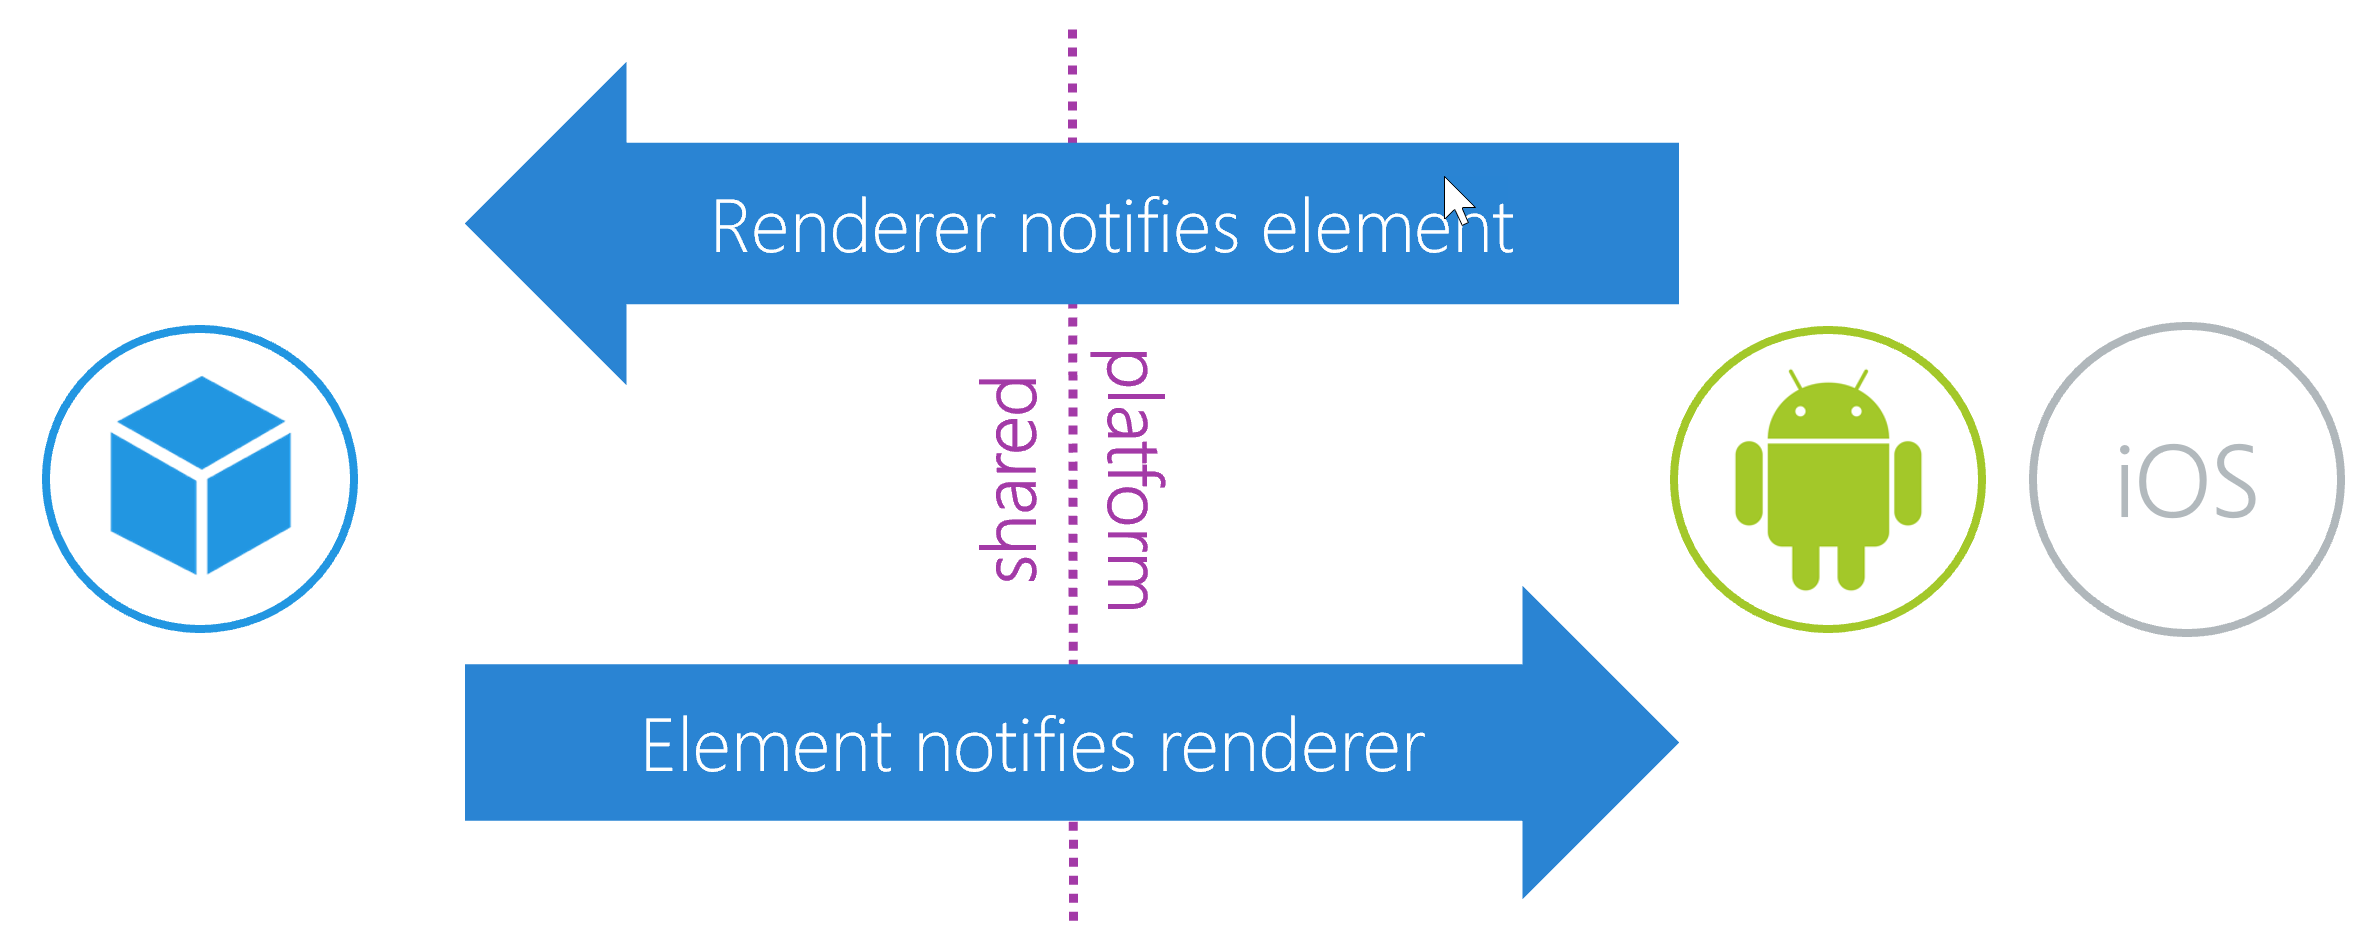 Diagram showing notifications flowing from the TouchUpInside event of a UIButton to the iOS ButtonRenderer, then to the Xamarin.Forms Button and your app's Clicked event handling.